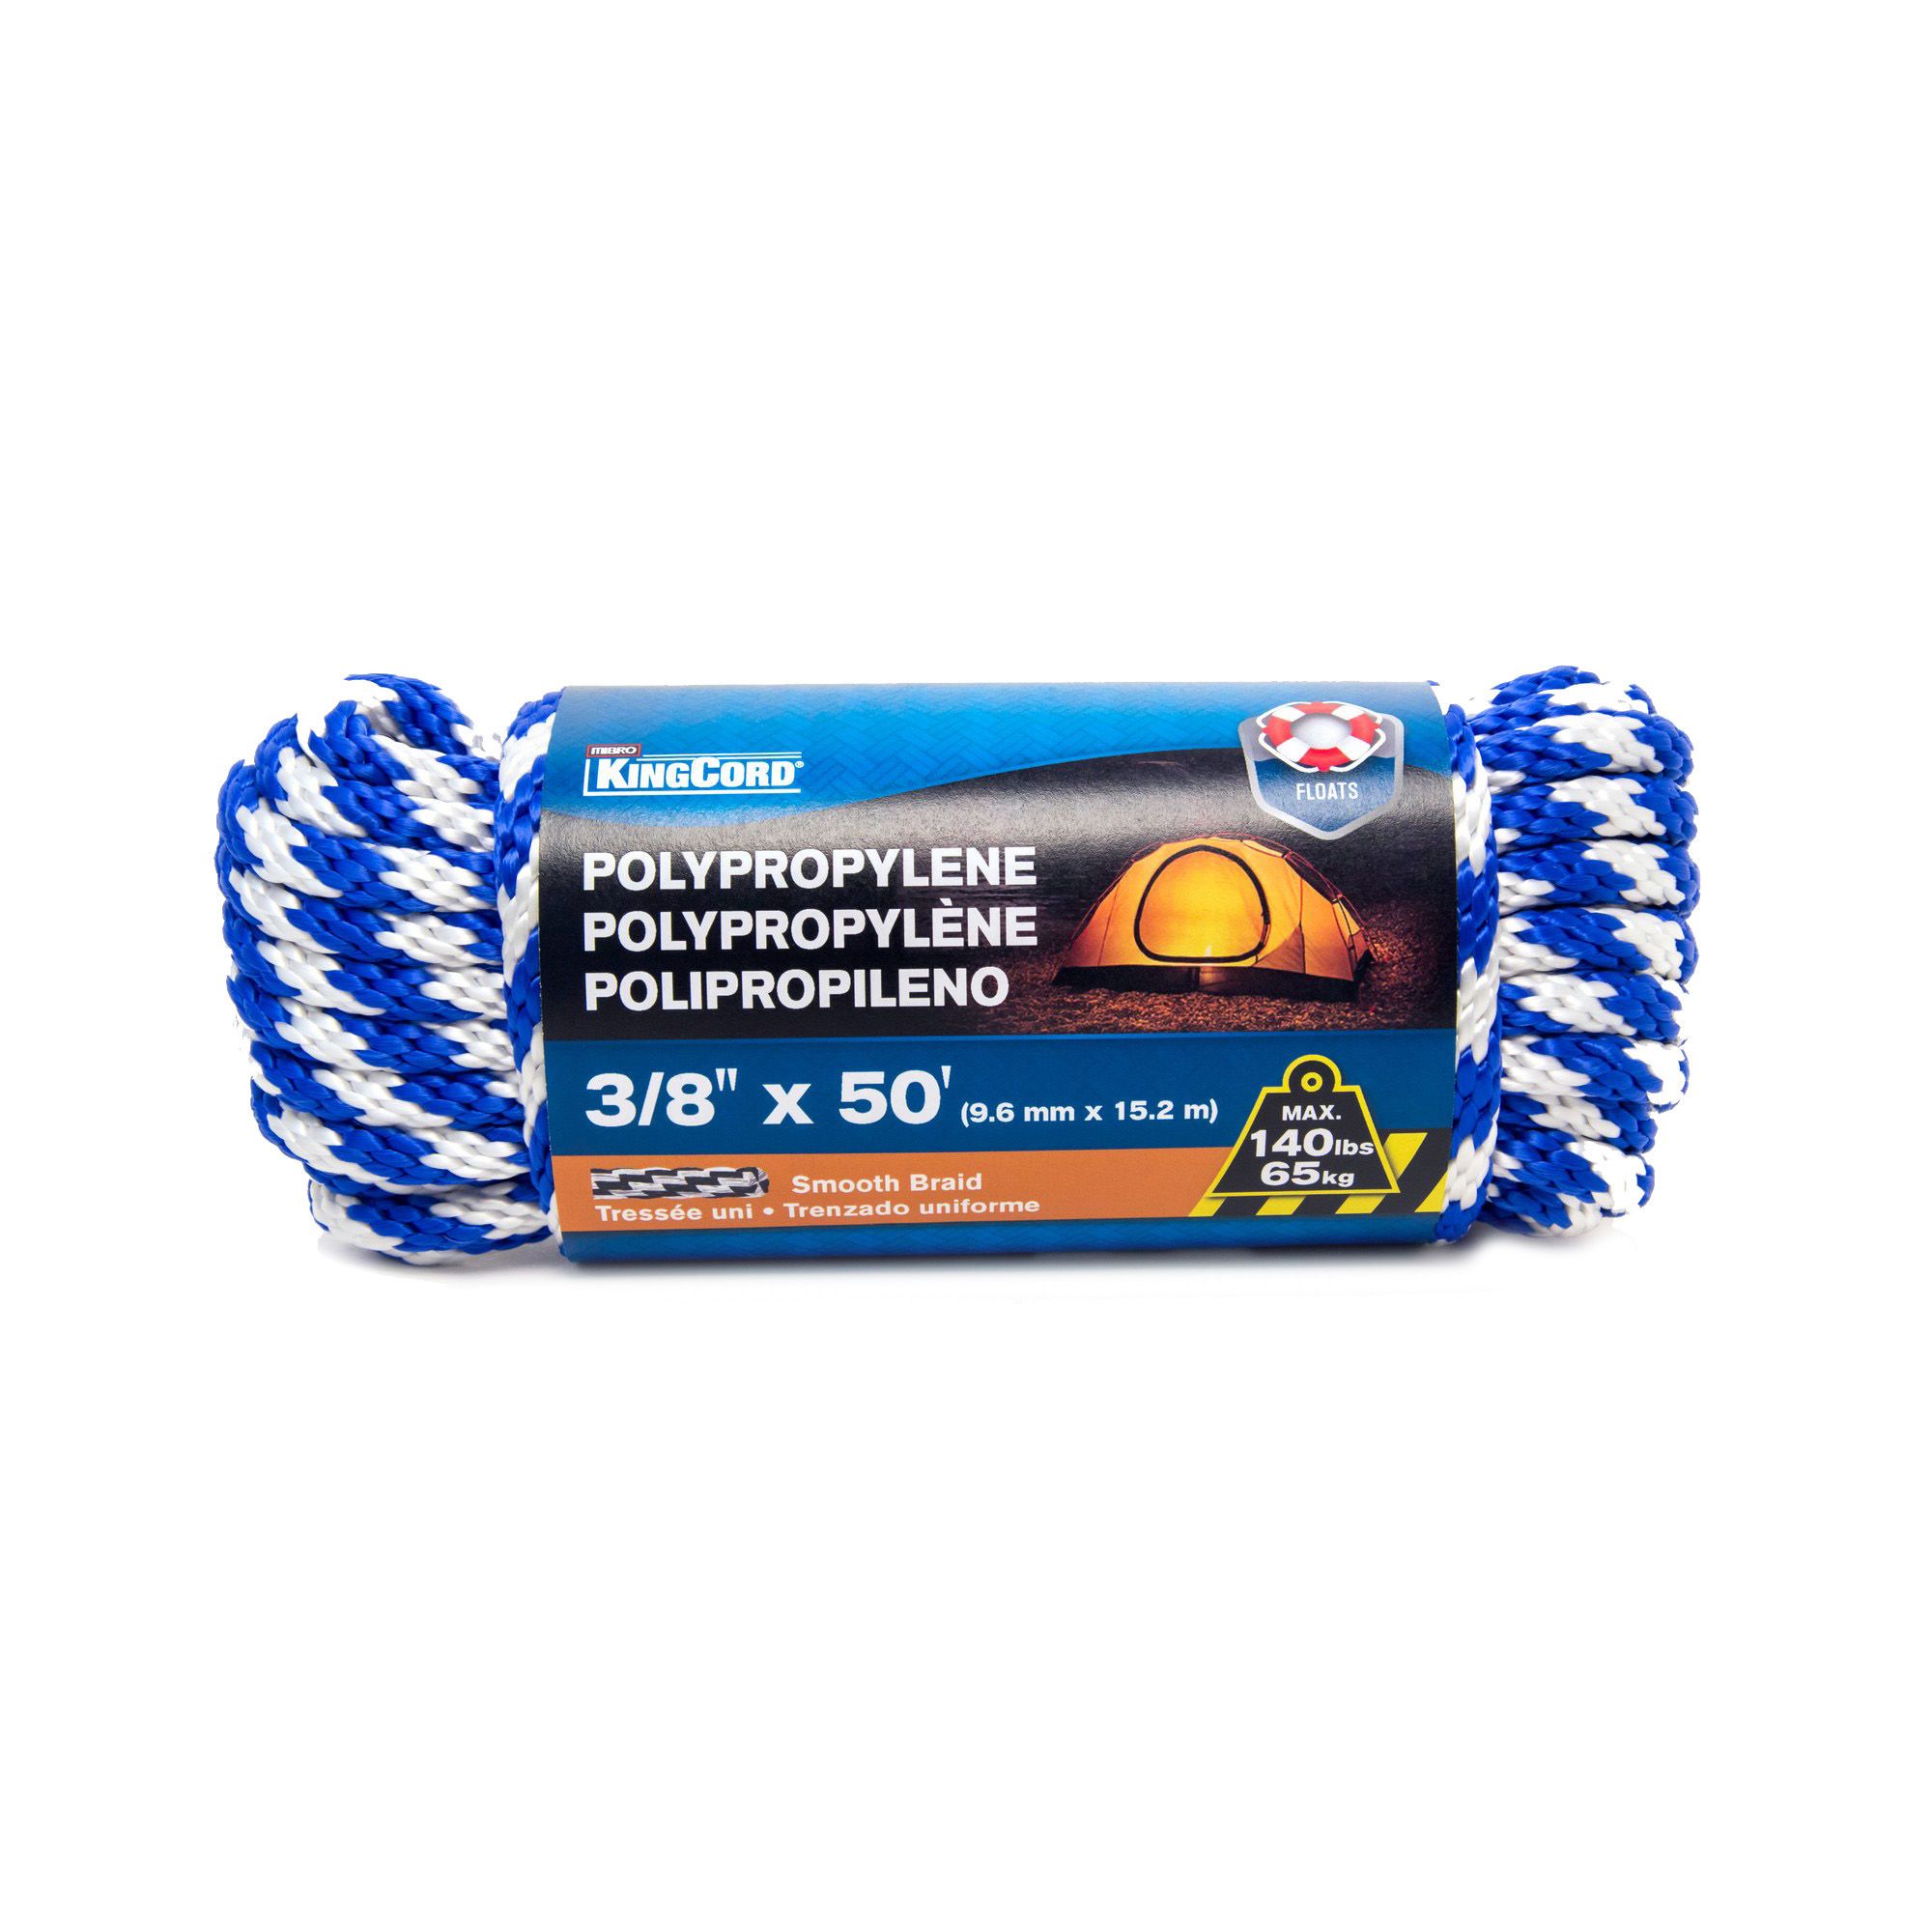 Smooth Polypropylene Braid Rope - Blue/White - 3/8 x 50' from KINGCORD